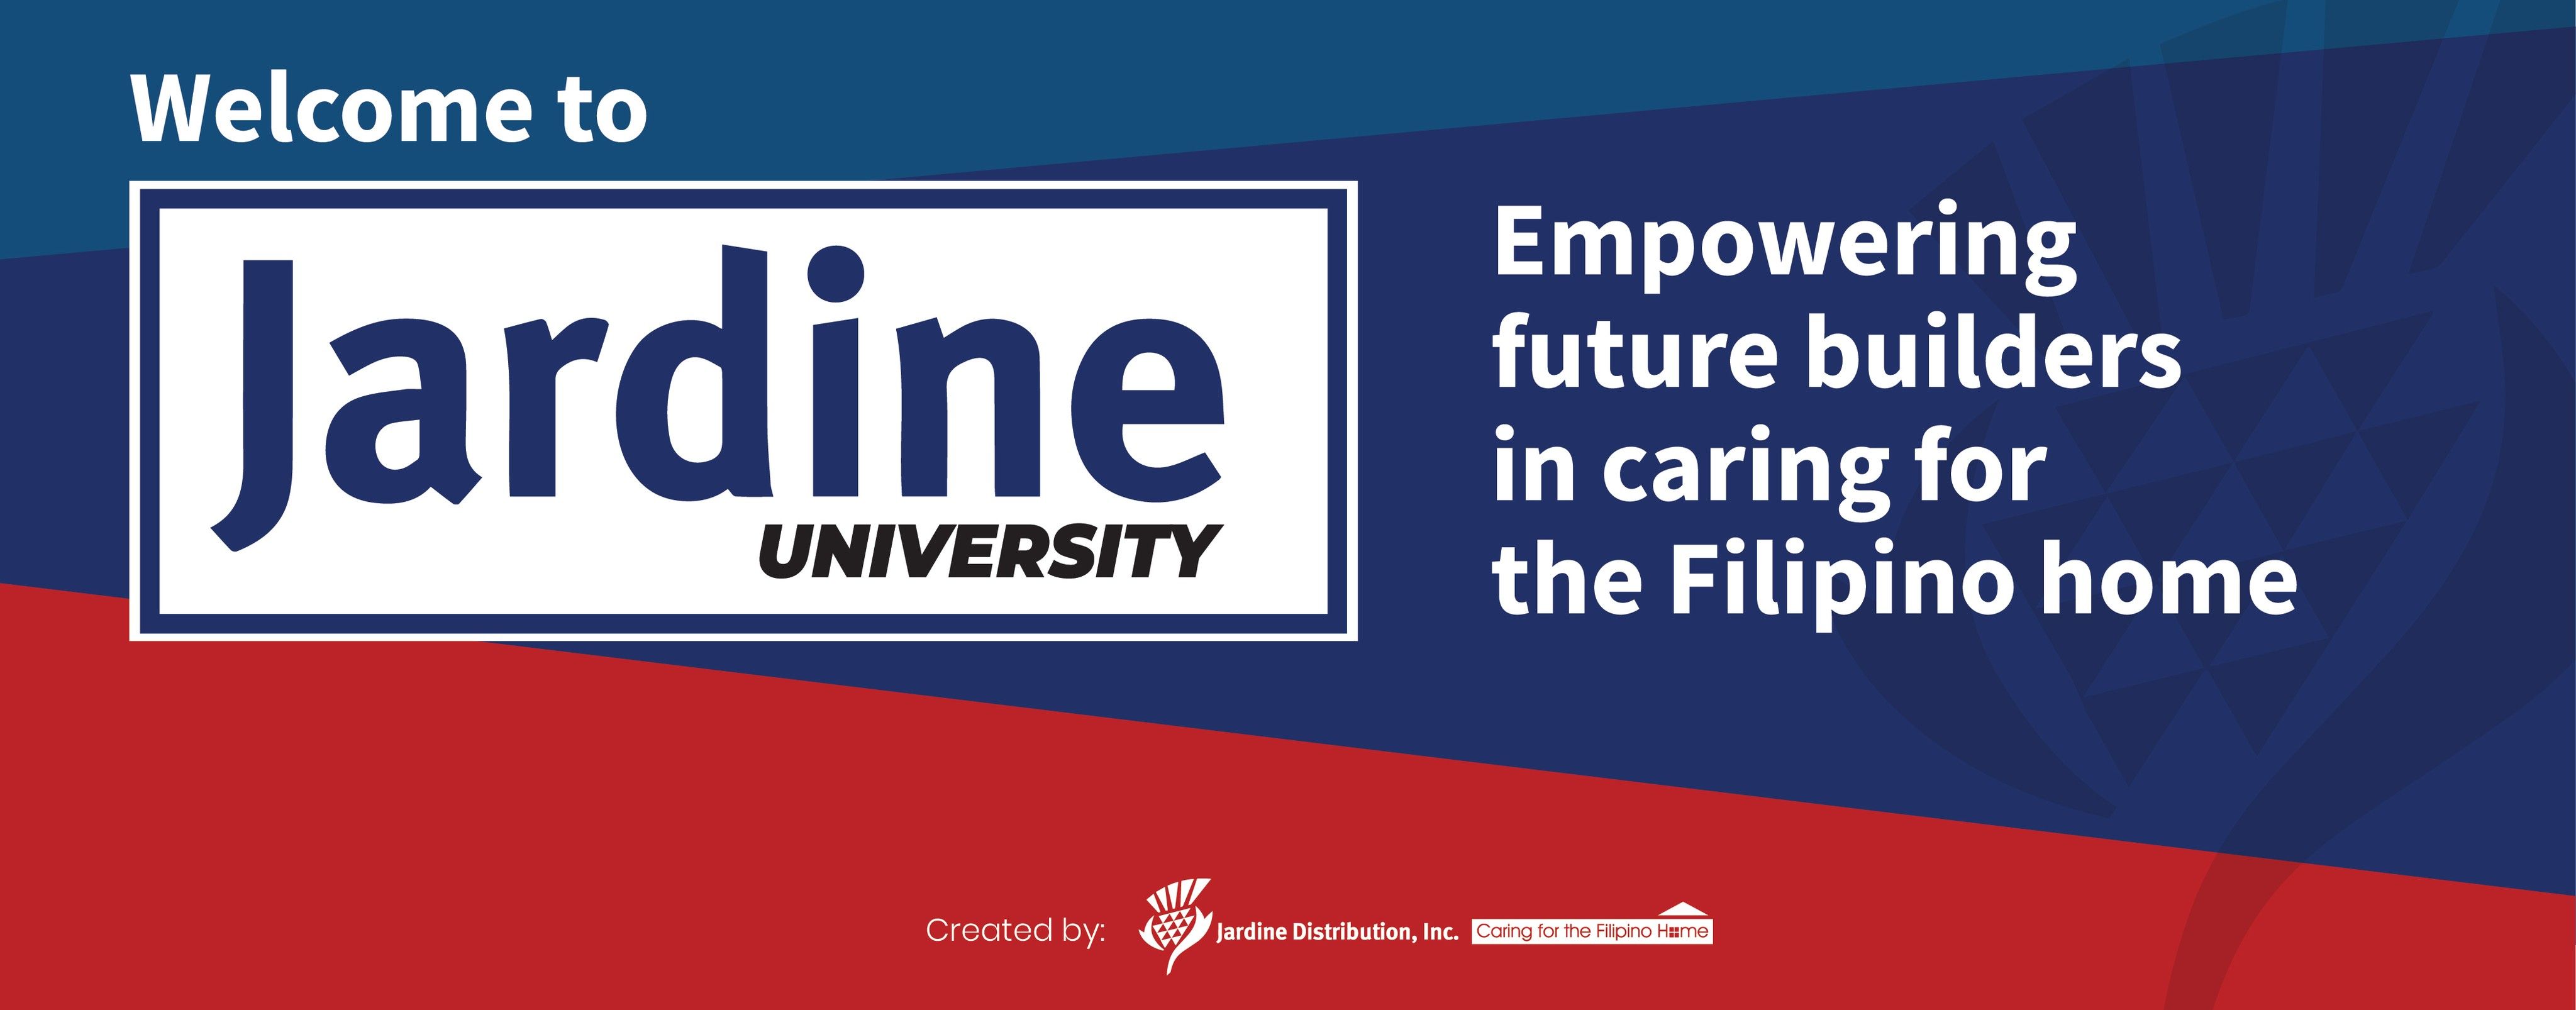 Welcome to Jardine University, Empowering Future Builders in Caring for the Filipino home, Created by Jardine Distribution Inc, Caring for the Filipino Home